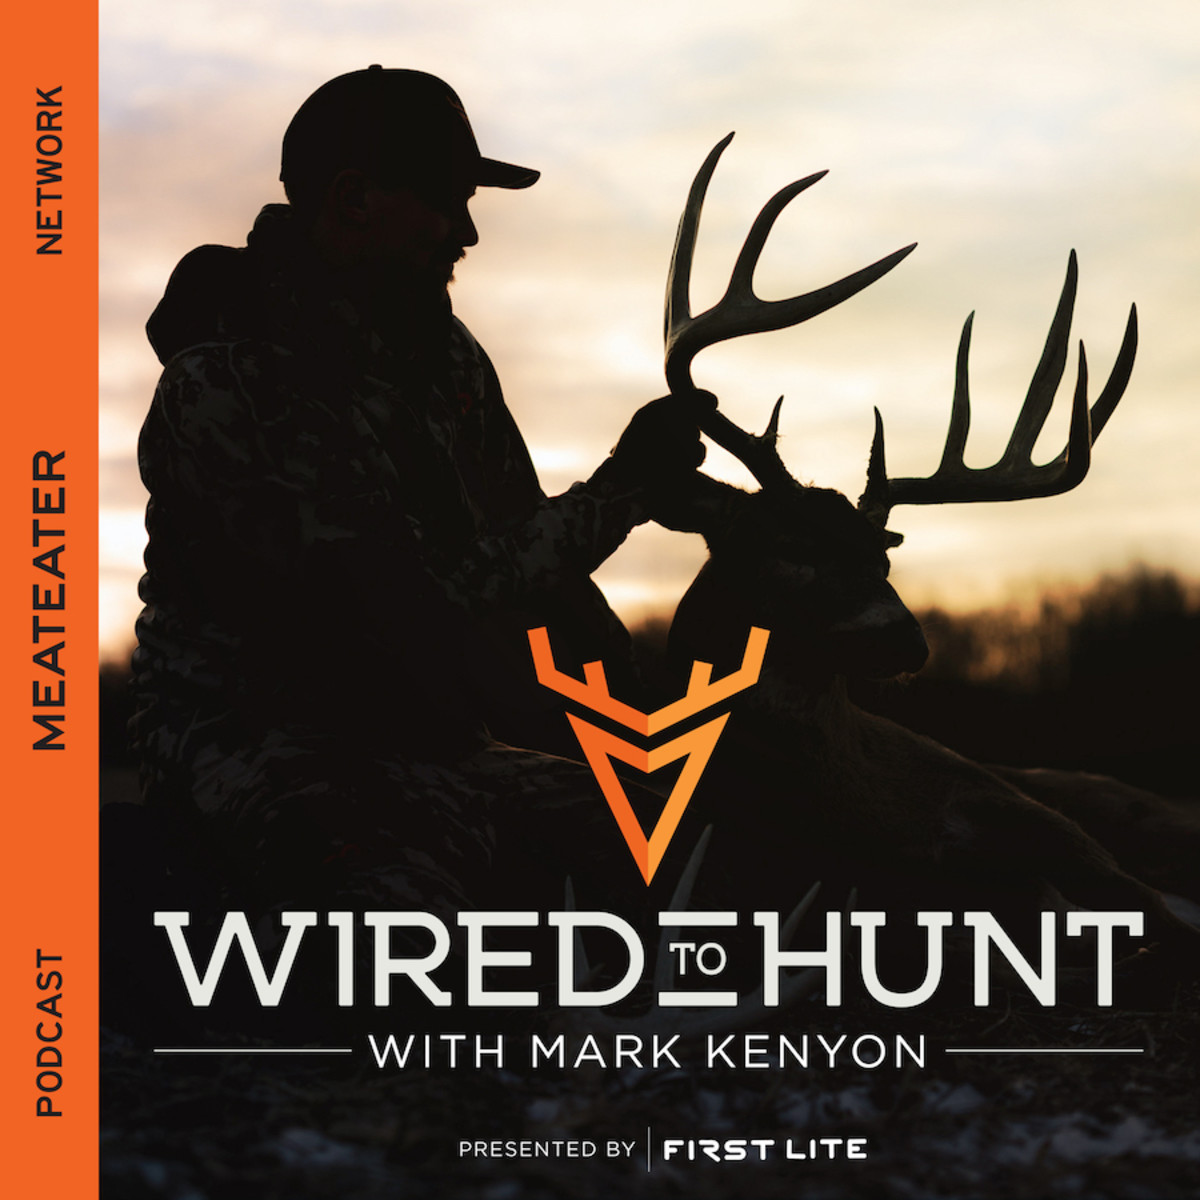 Ep. 294: How Deer See, Hear, Smell, and Survive with Pat Durkin